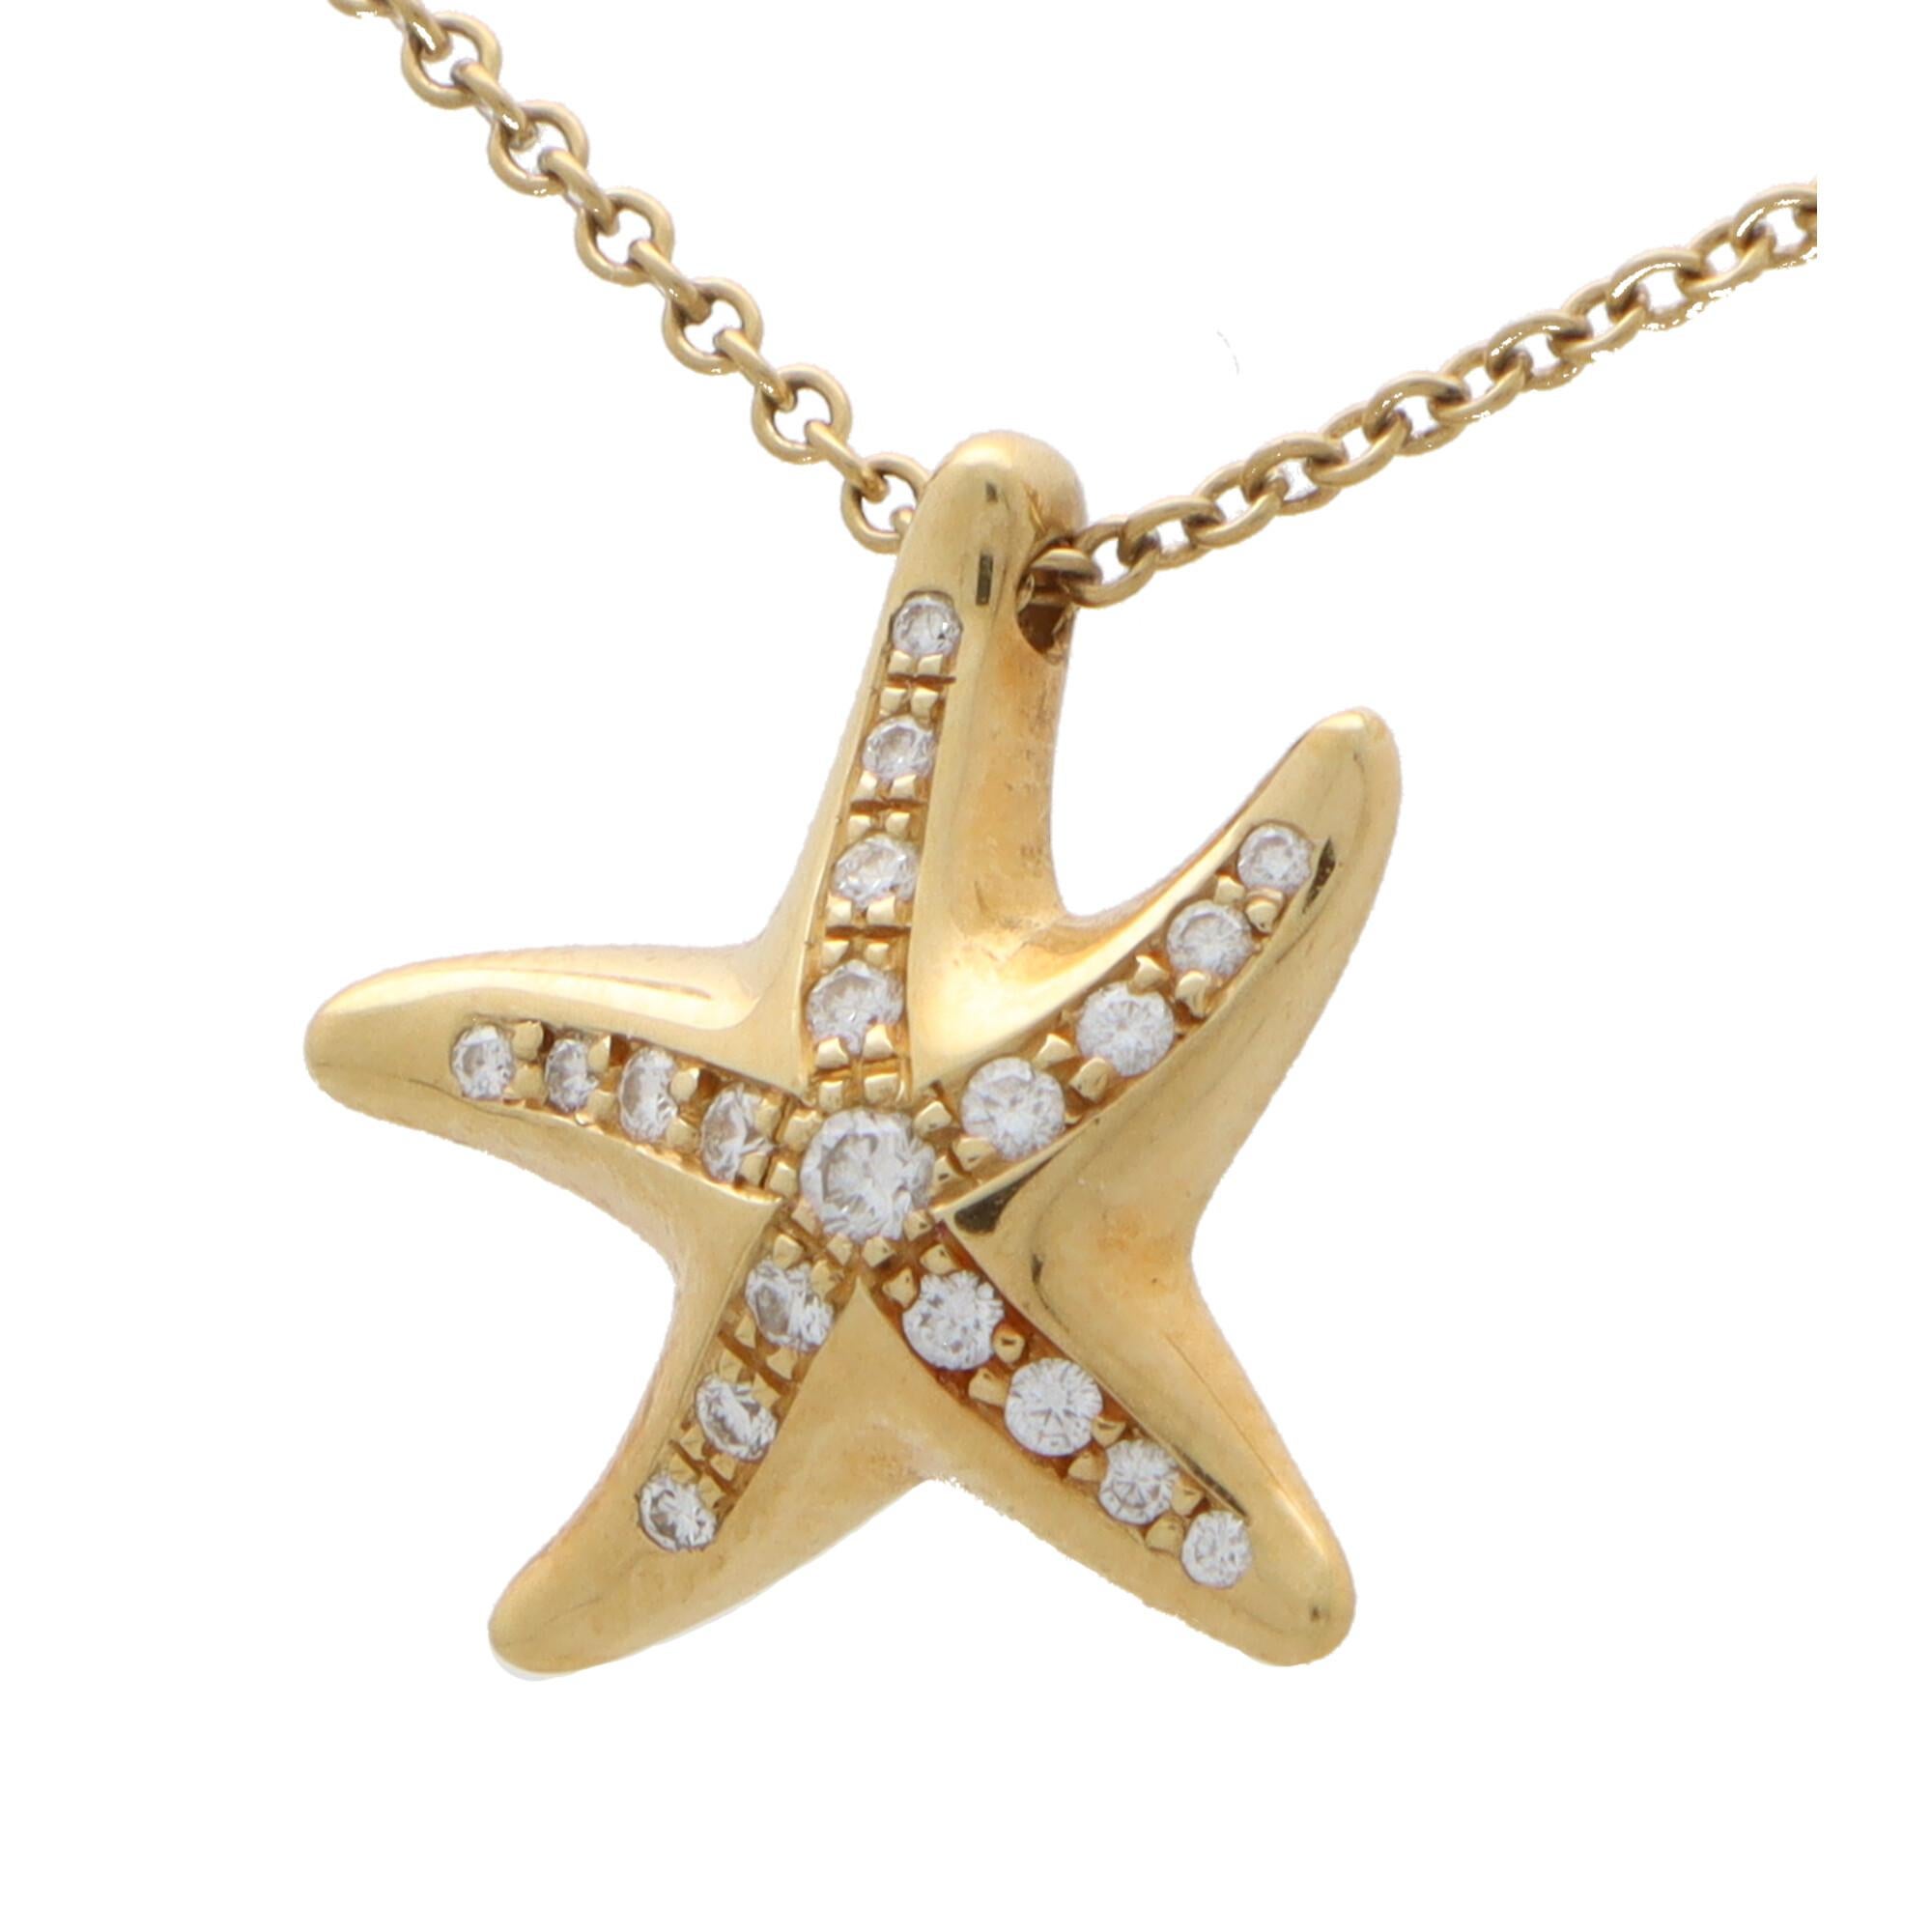 A beautiful vintage Elsa Peretti for Tiffany & Co. diamond starfish pendant necklace set in 18k yellow gold.

From the current Elsa Peretti collection, the pendant depicts an elegant starfish pave set to the top with 20 round brilliant cut diamonds.